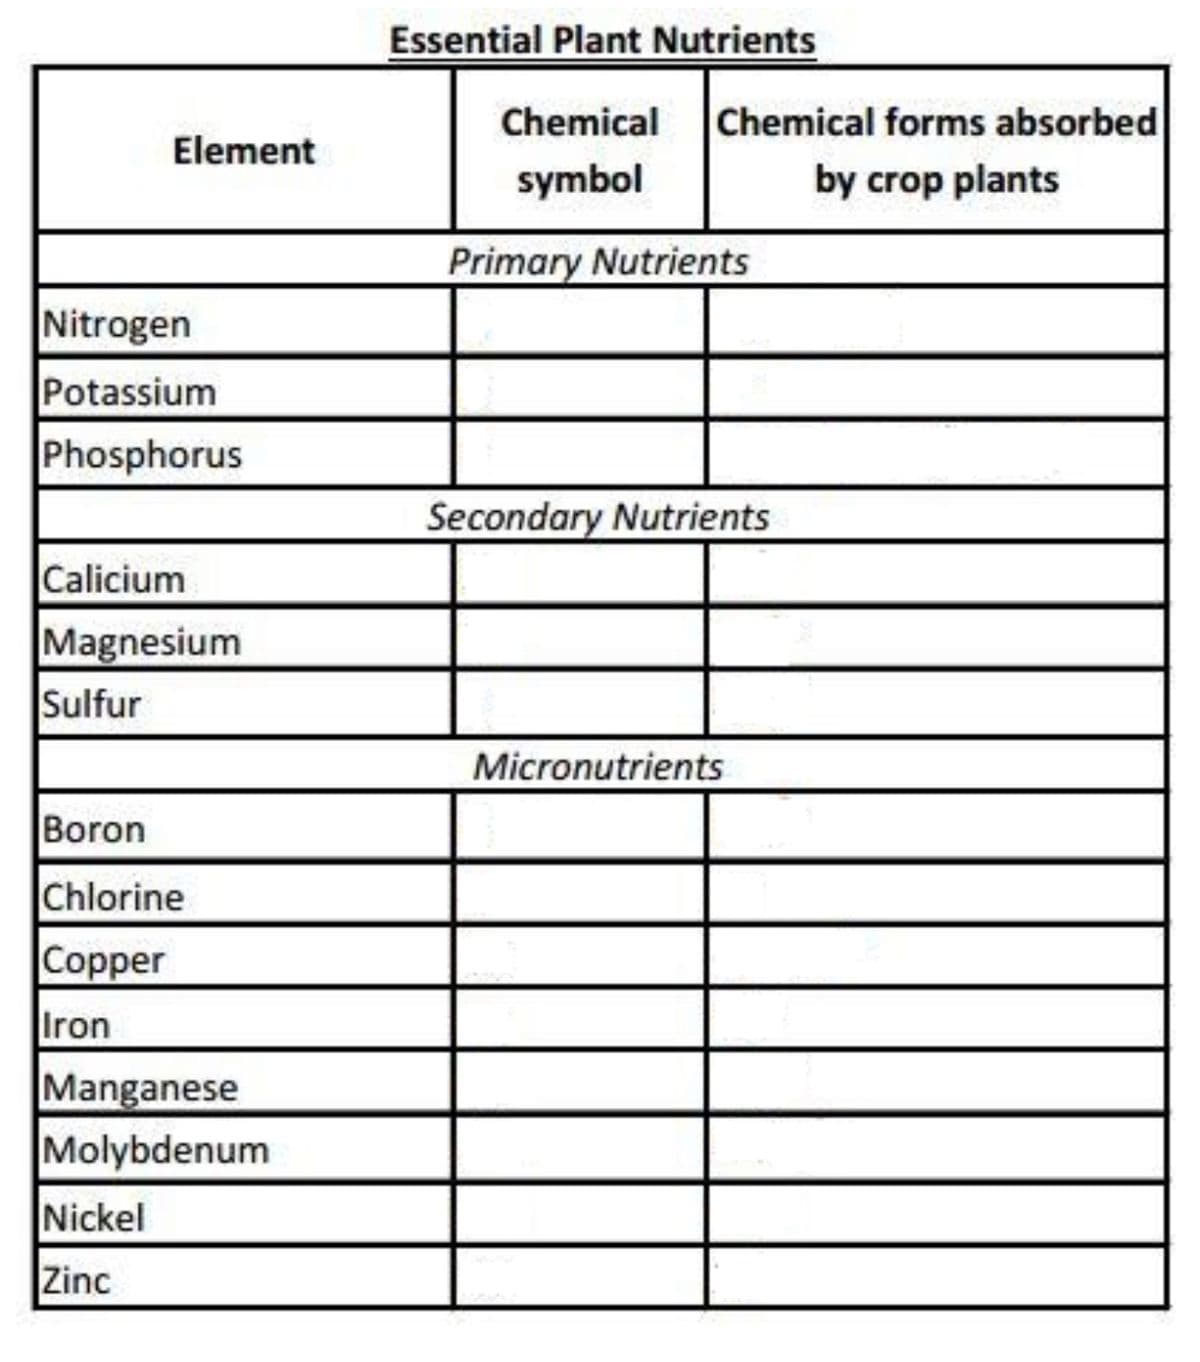 Essential Plant Nutrients
Chemical
Chemical forms absorbed
Element
symbol
by crop plants
Primary Nutrients
Nitrogen
Potassium
Phosphorus
Secondary Nutrients
Calicium
Magnesium
Sulfur
Micronutrients
Boron
Chlorine
Copper
Iron
Manganese
Molybdenum
Nickel
Zinc
